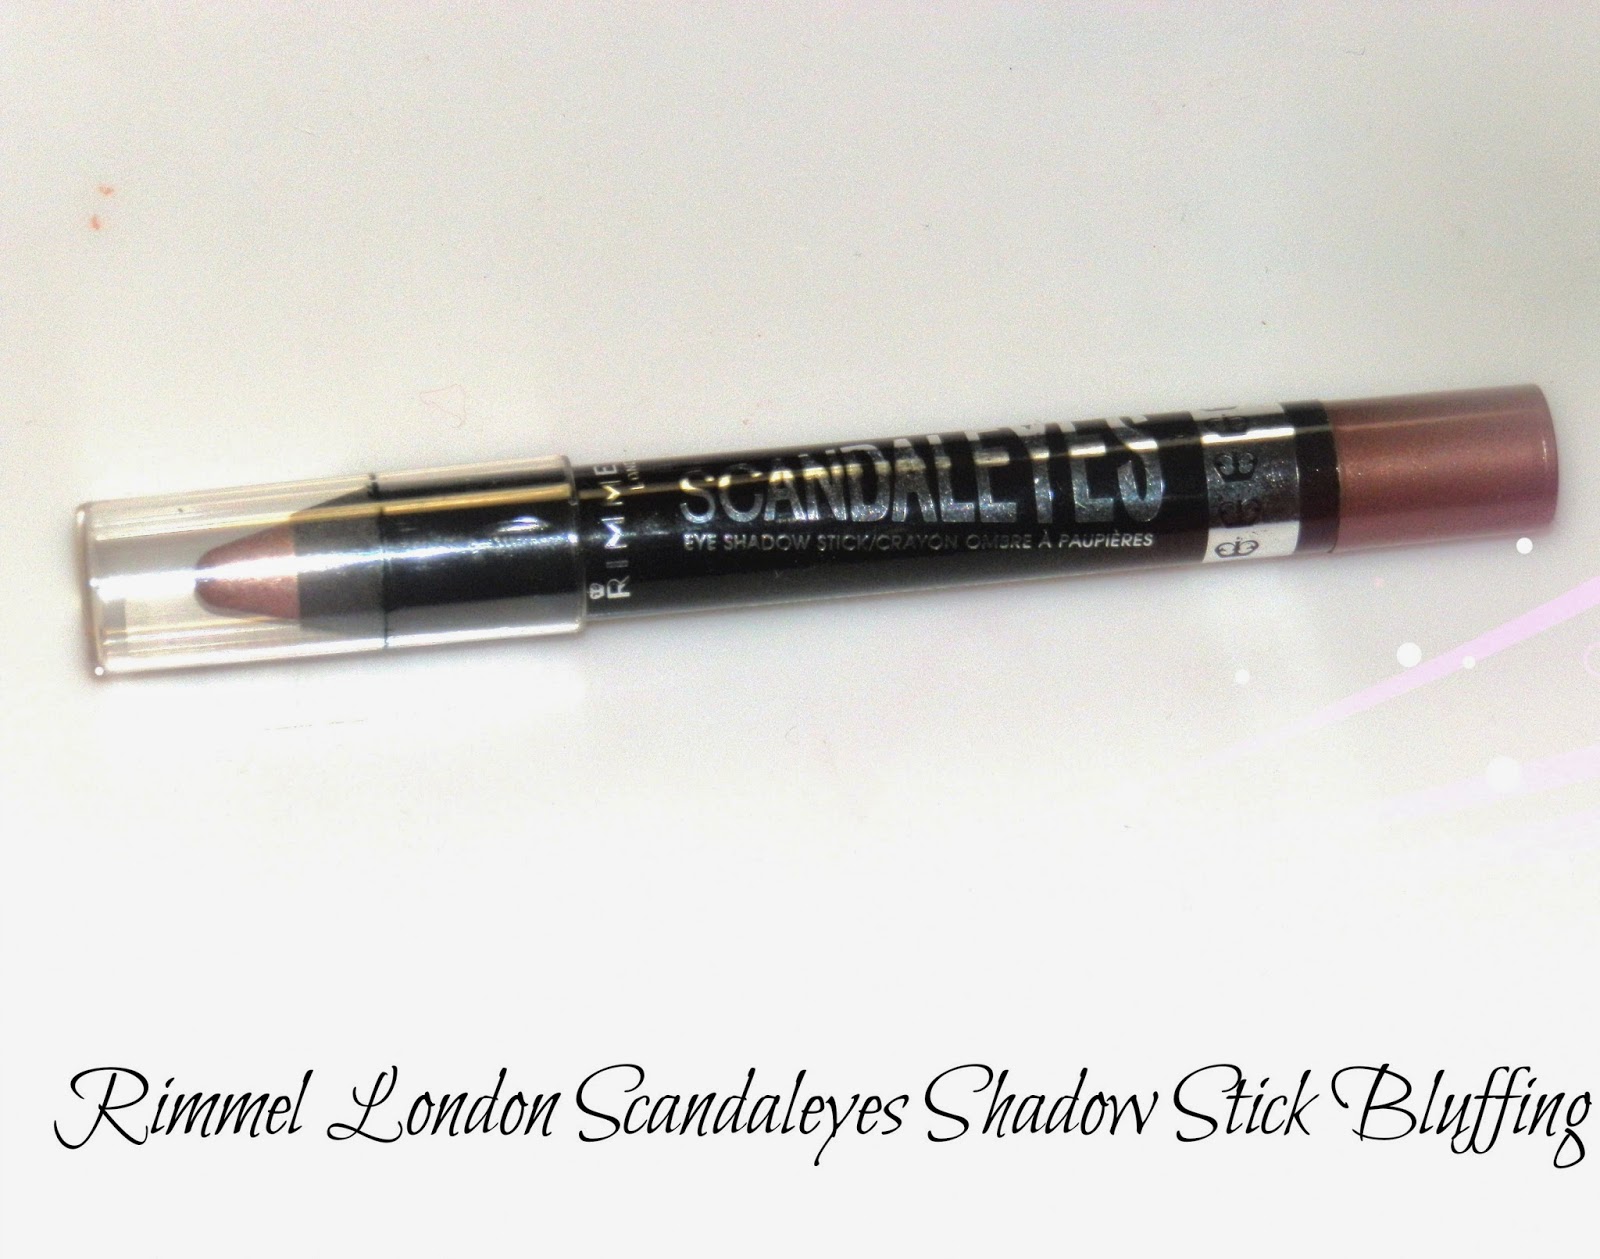 Rimmel London Scandaleyes Shadow Stick Bluffing Swatches 